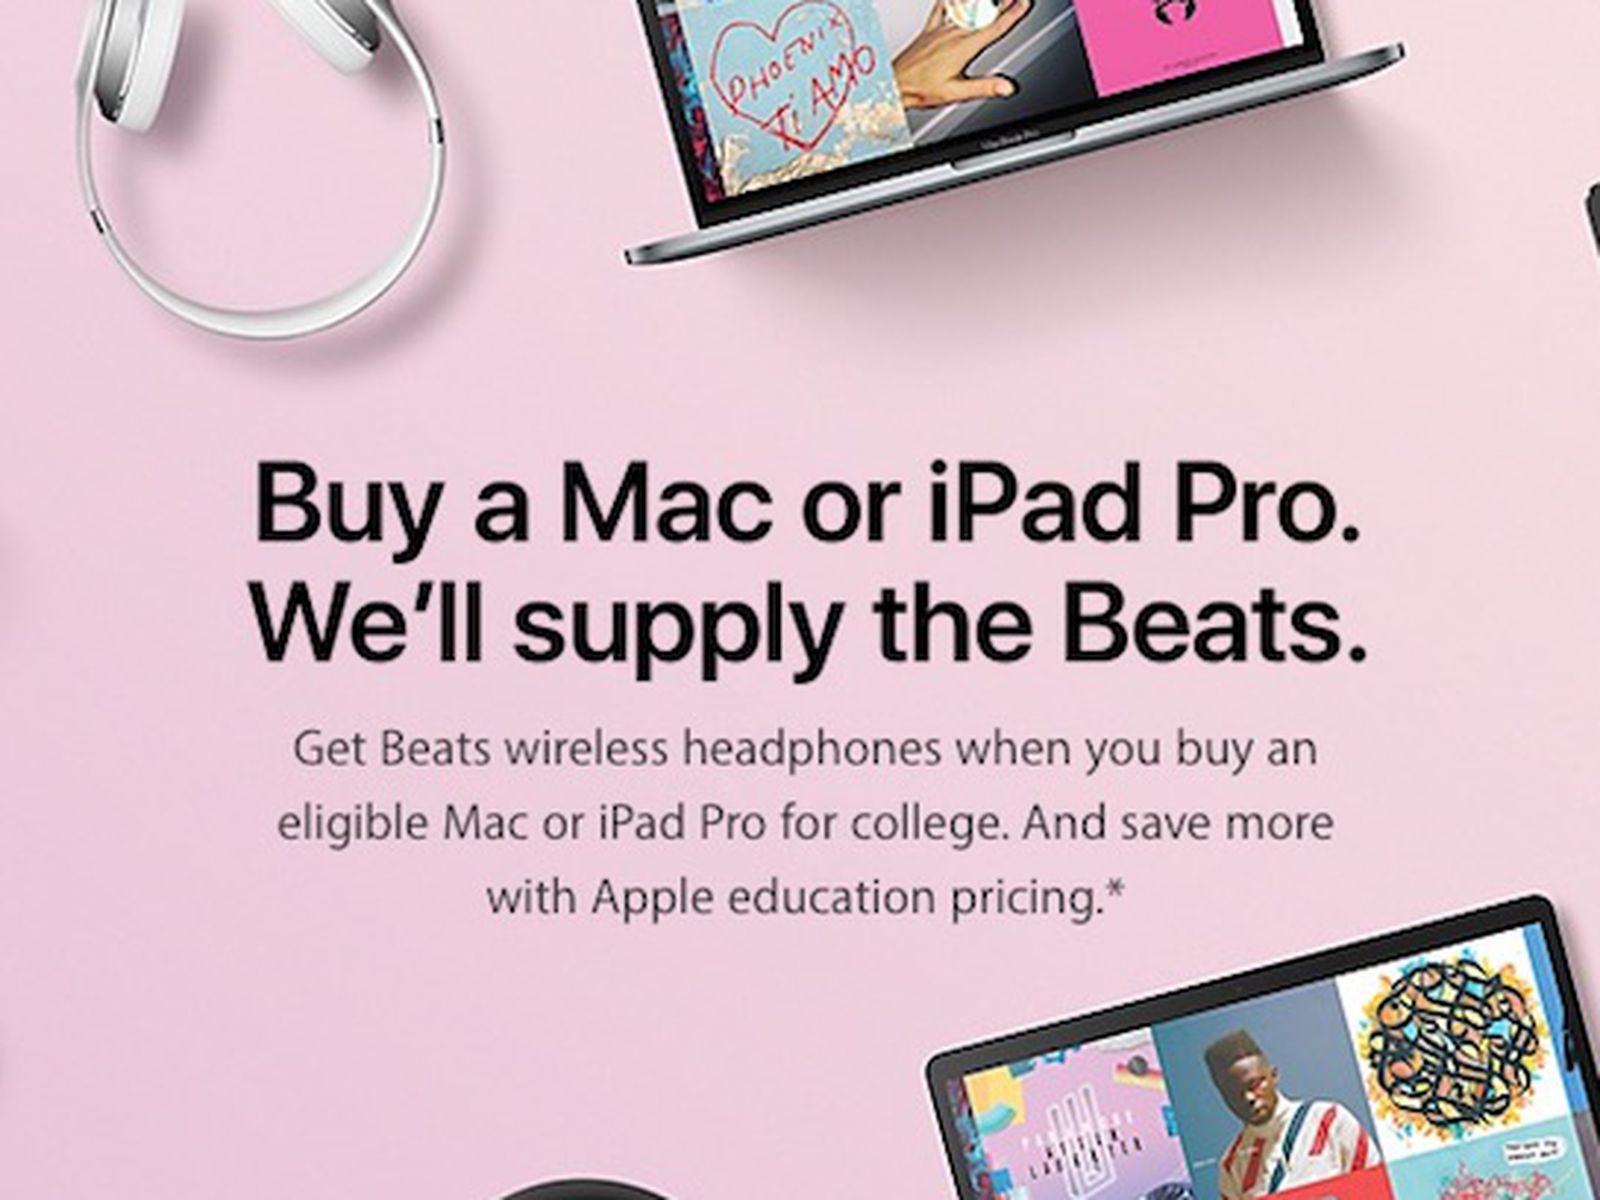 Students can score Beats earphones with Mac and iPad purchases